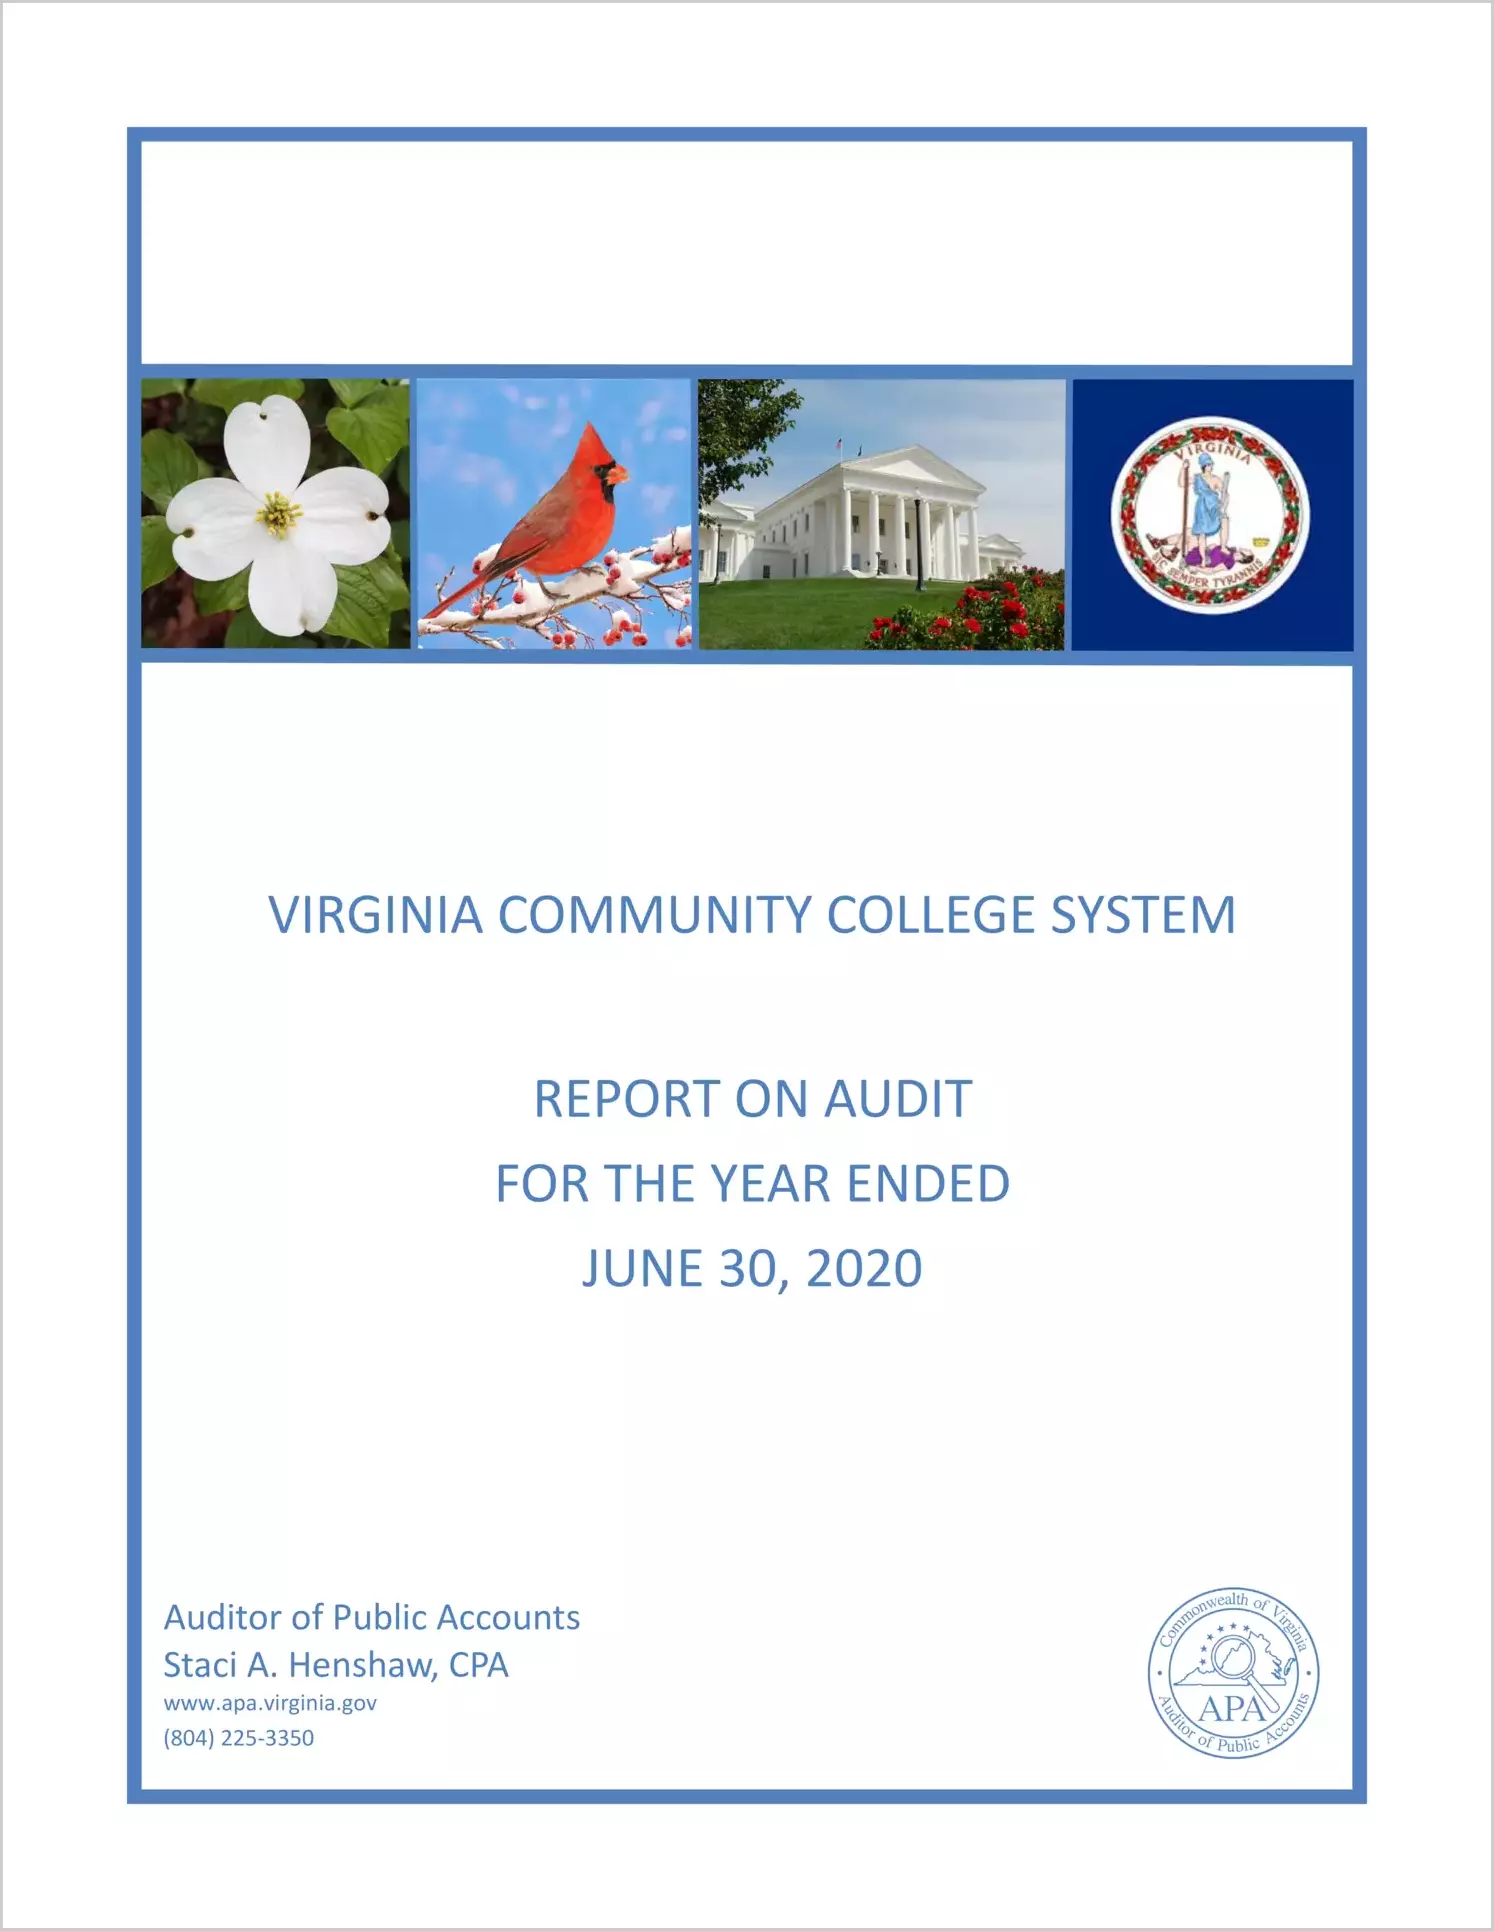 Virginia Community College System for the year ended June 30, 2020